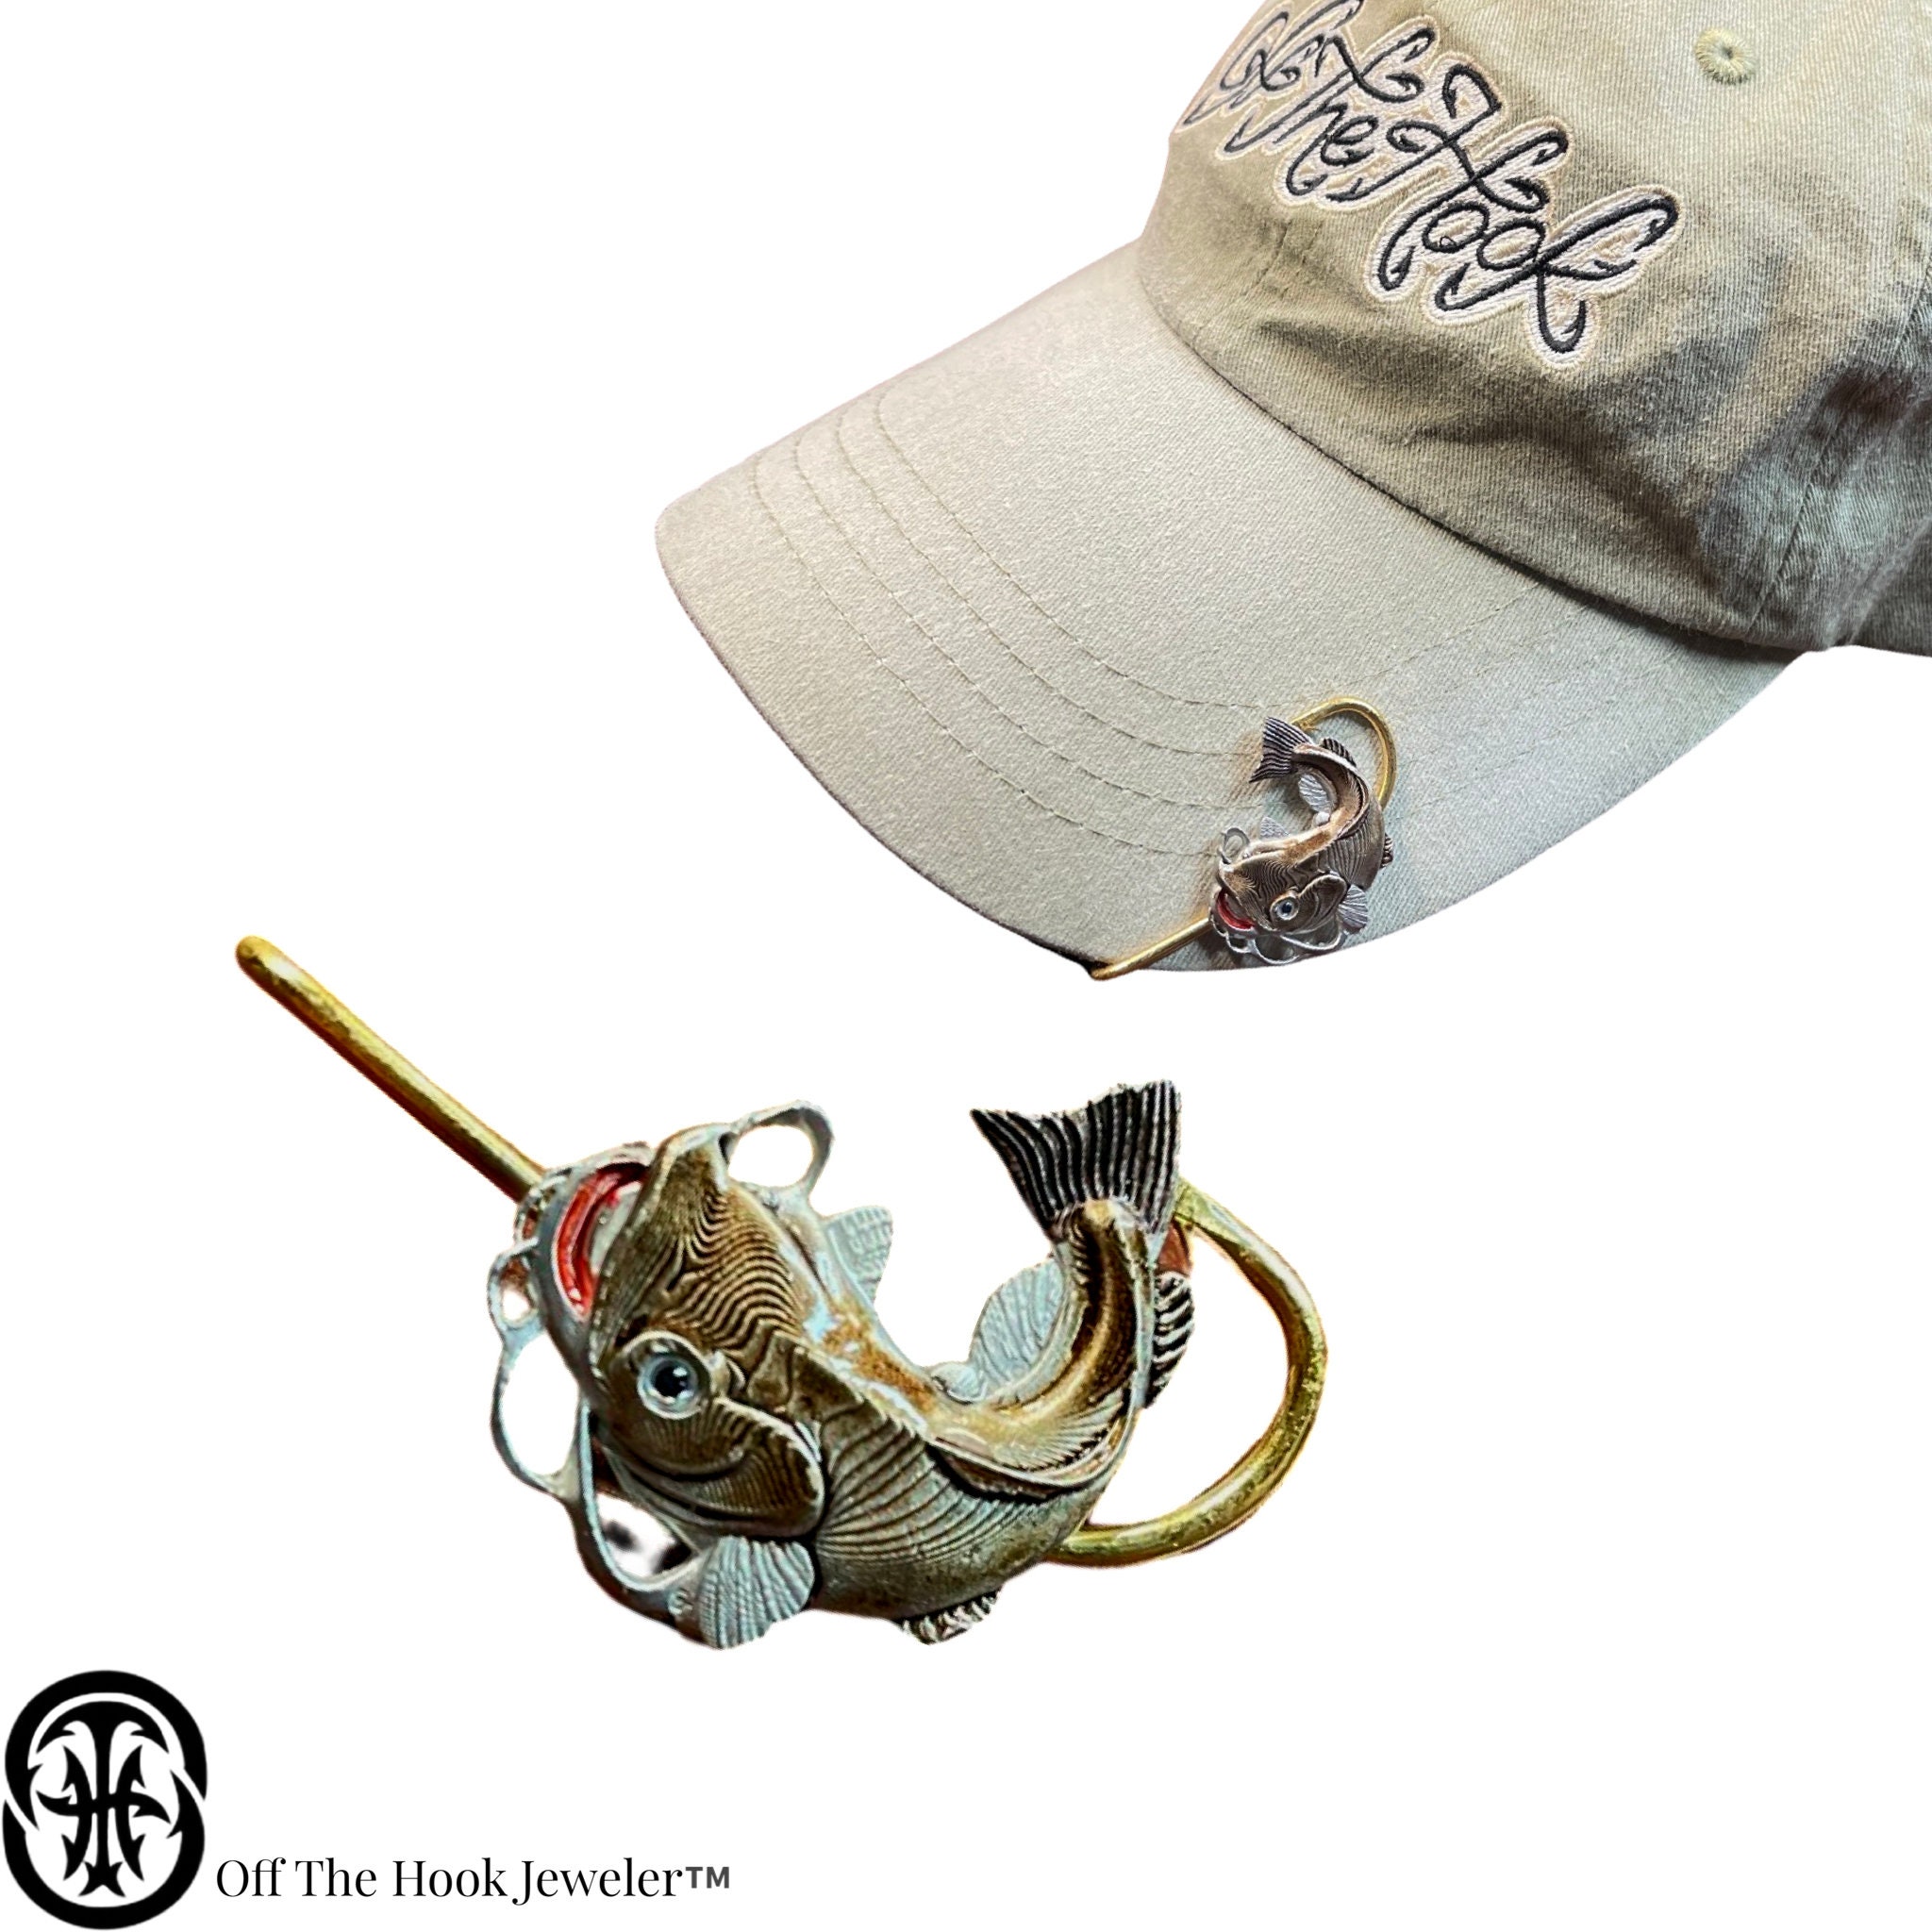 Into The Backing - Fly Fishing Hat